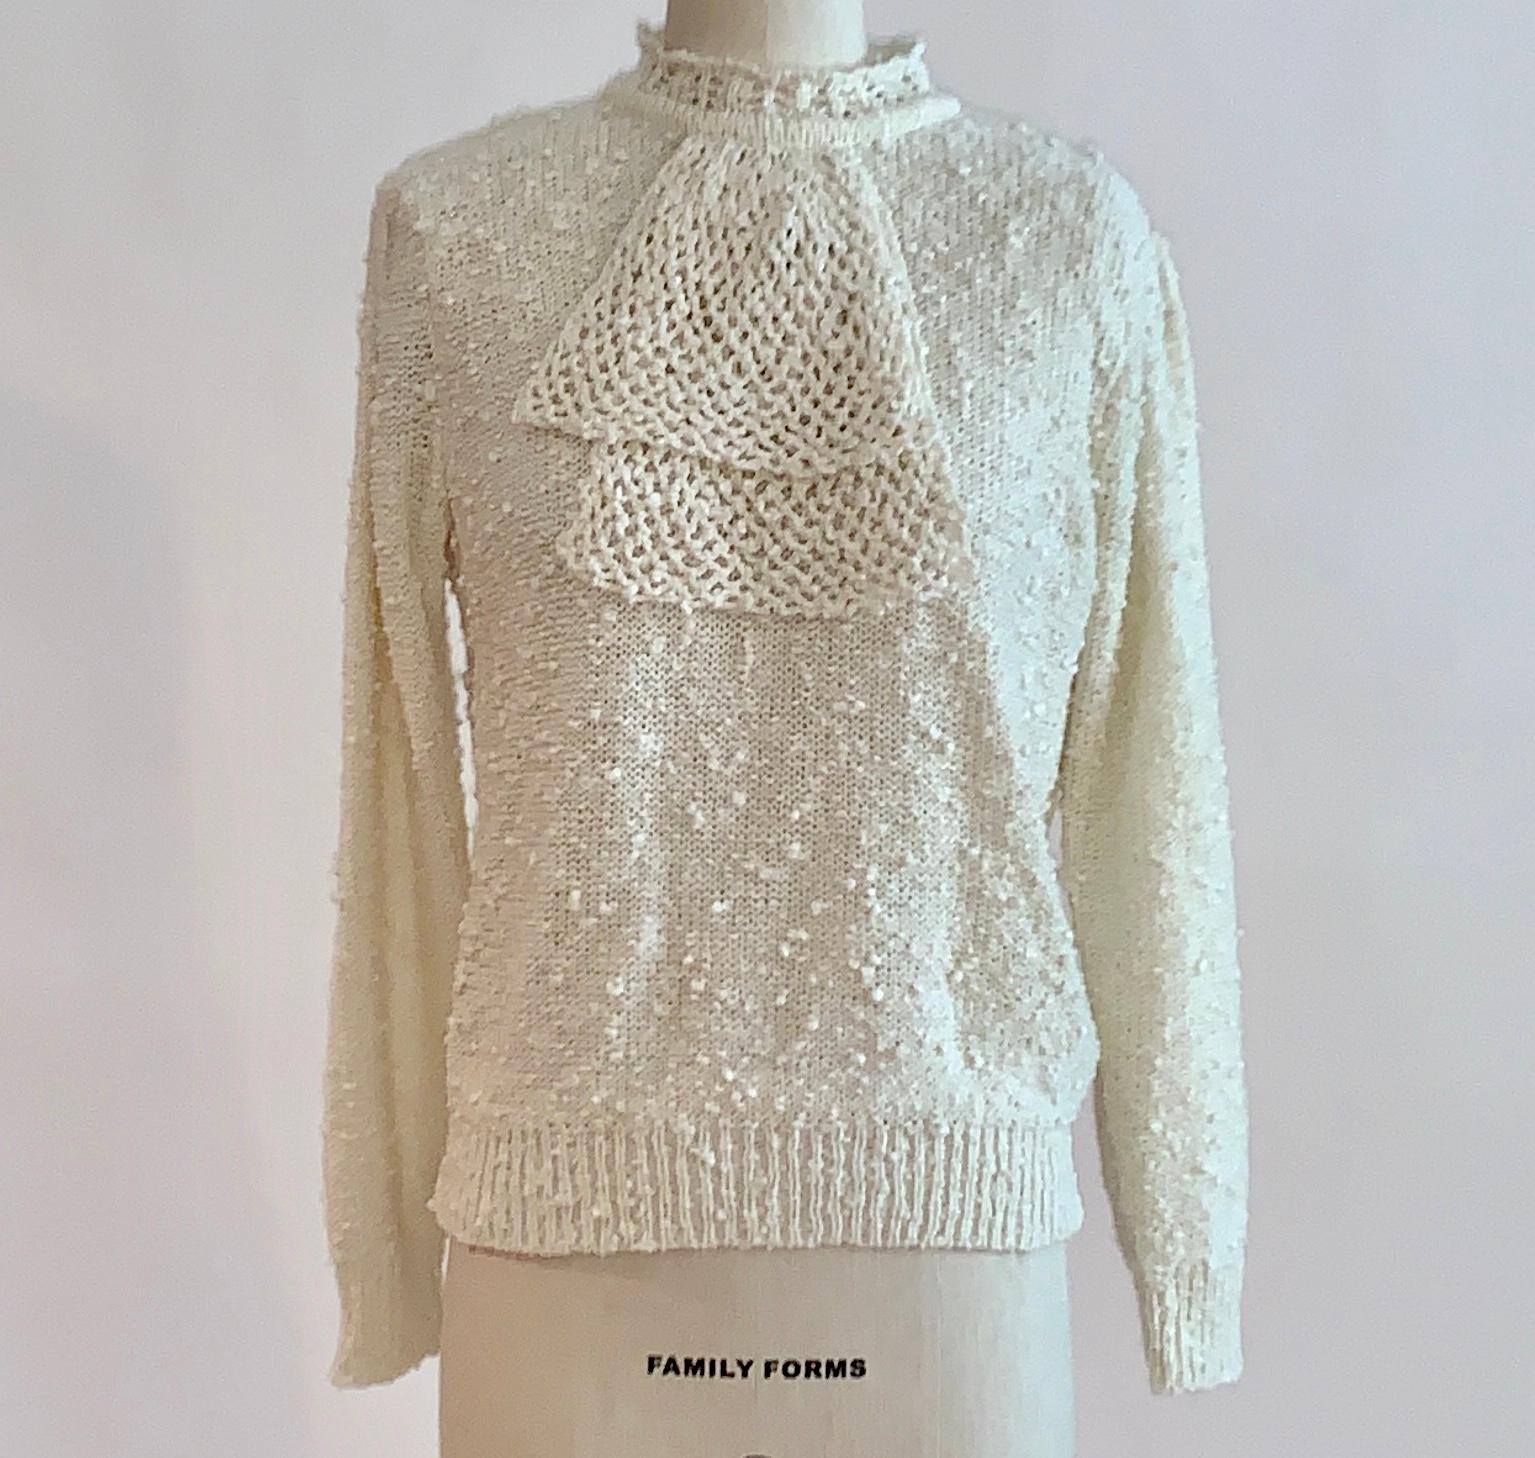 Vintage 1970s cream Le Roy sweater in a wonderful nubby knit with attached jabot collar. Long sleeve, pearlized button closure at back neck. Slightly open-knit, layer for a conservative look or wear alone to show a tiny bit of skin. Right on trend